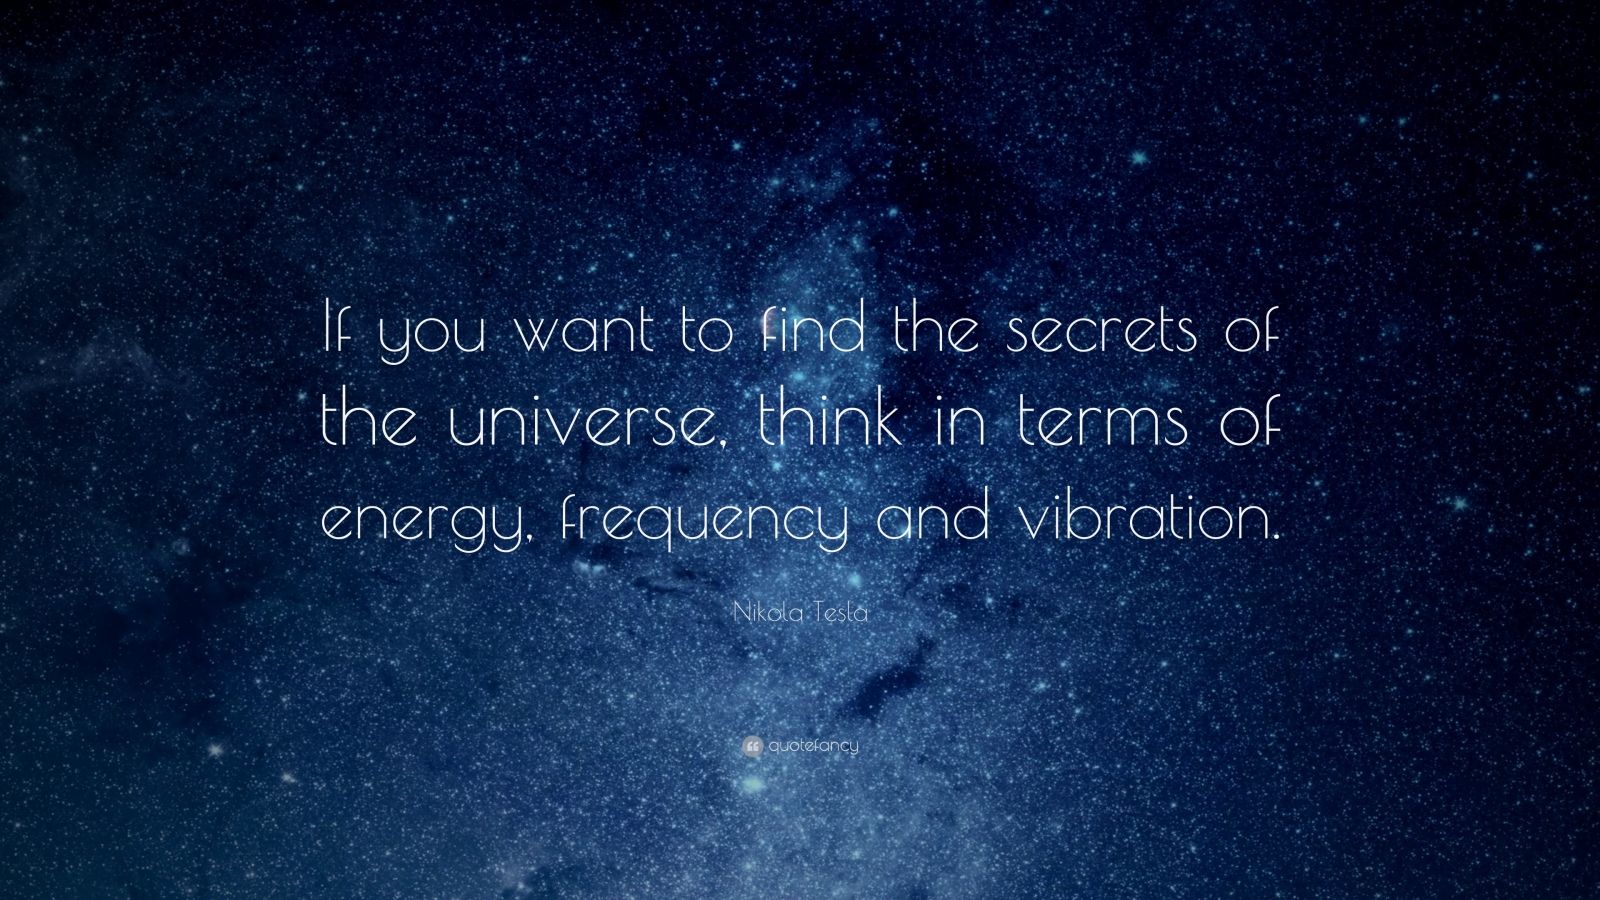 Nikola Tesla Quote: “If you want to find the secrets of the universe ...